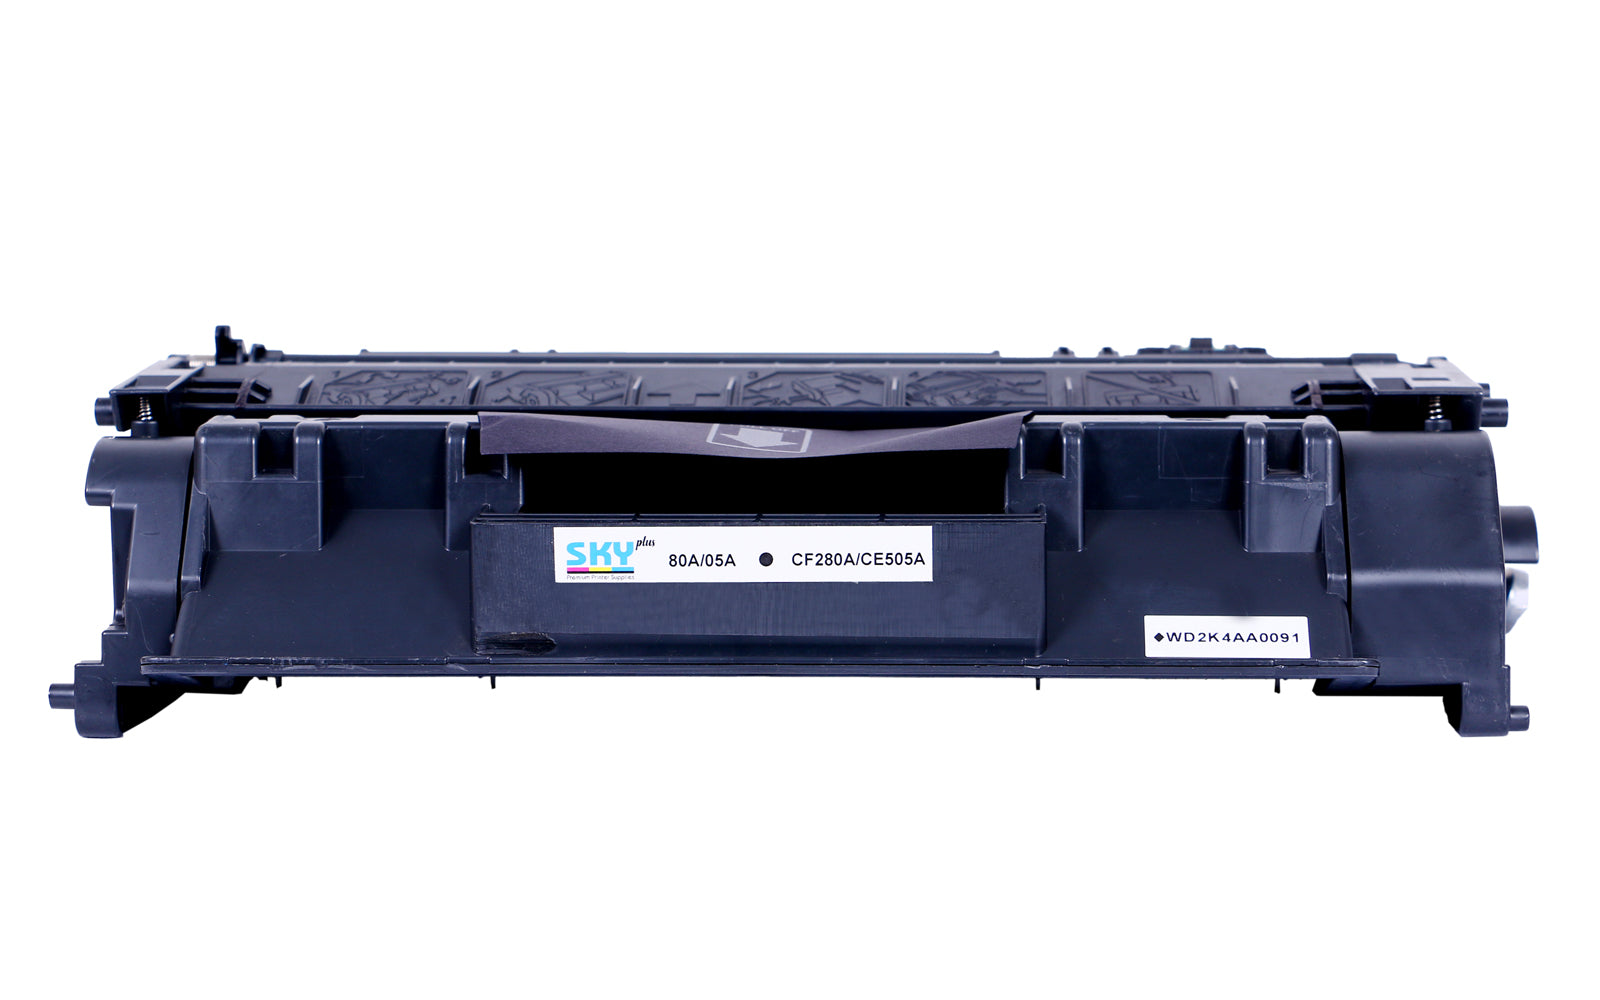 Sky Plus  80A  Remanufactured Toner Cartridge for   Pro 400 MFP M425dn and M401